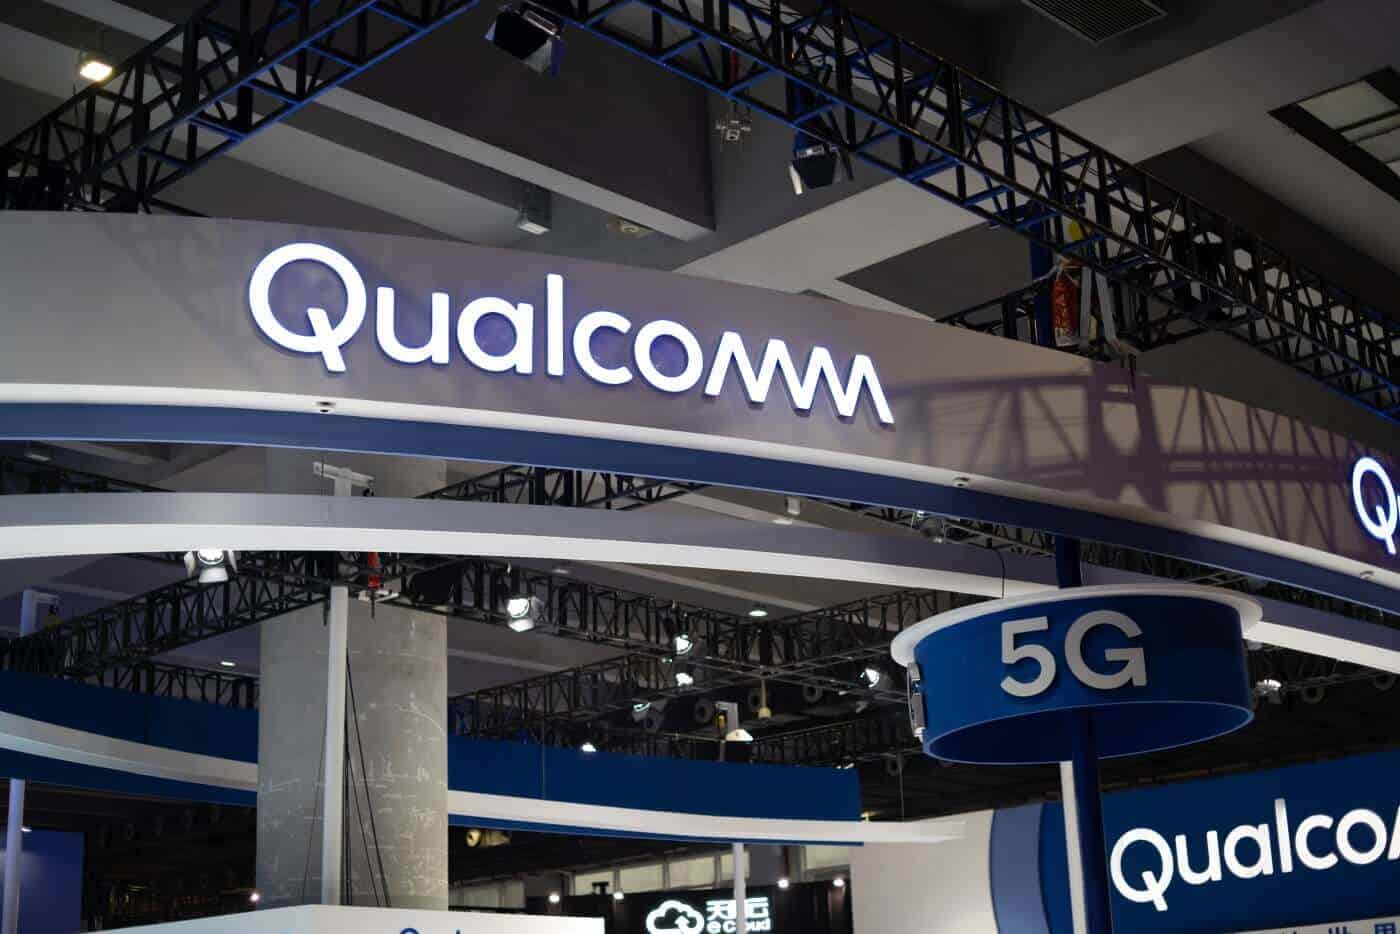 It seems phone makers like Google, Nokia and LG don't want Qualcomm's expensive Snapdragon 865 1